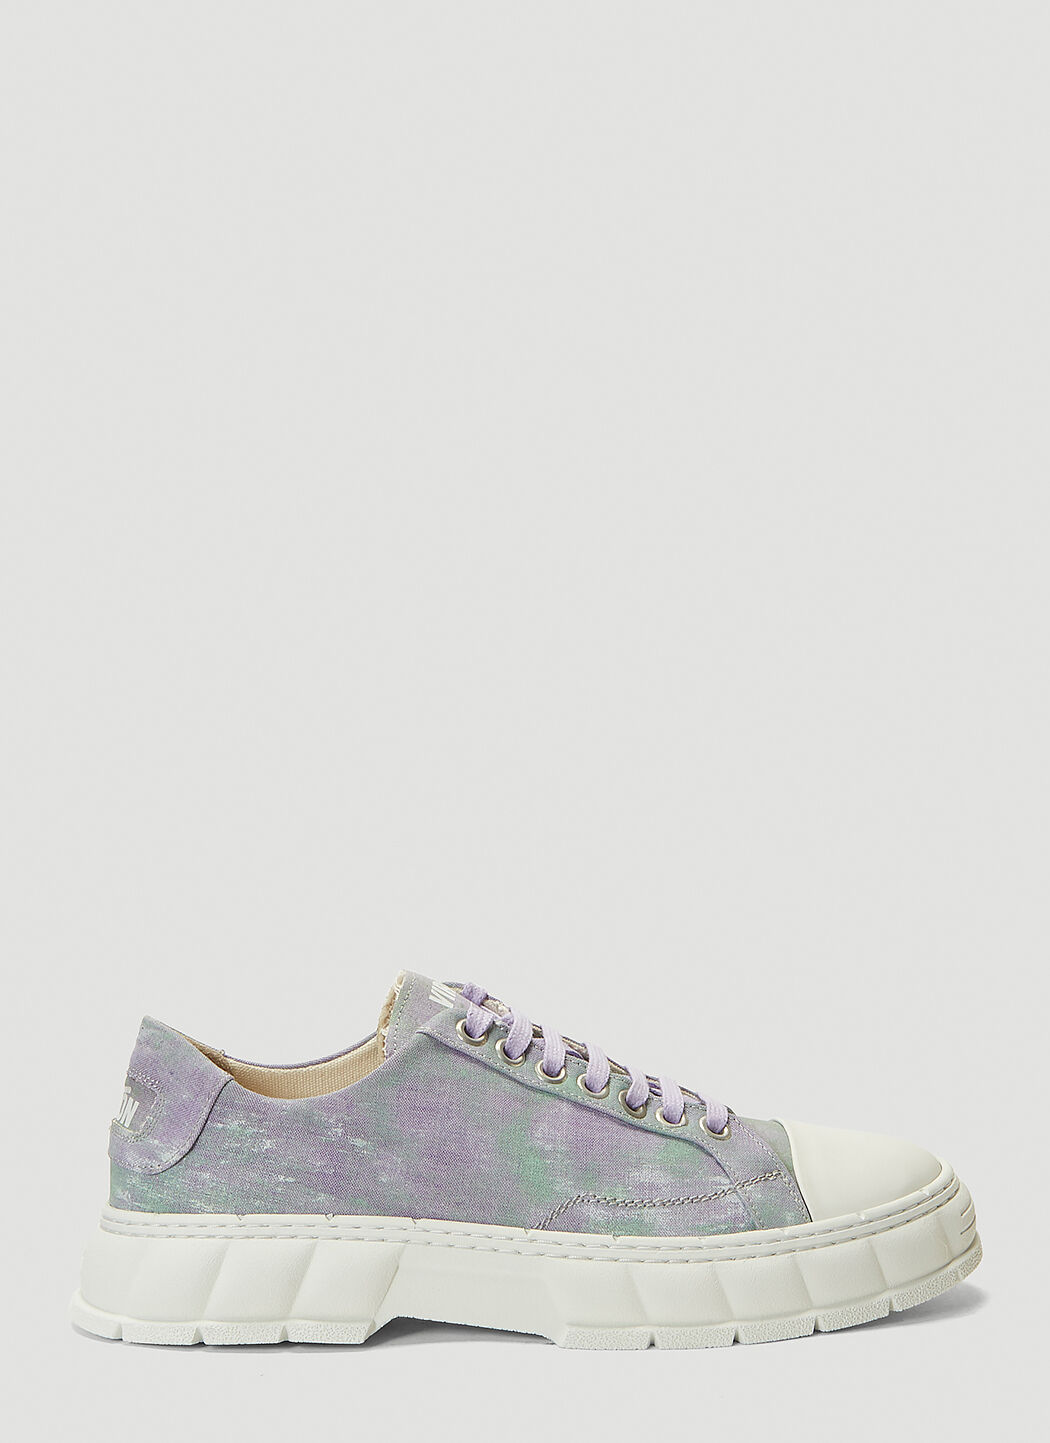 Rombaut 1968 Recycled Canvas Sneakers 블랙 rmb0244004